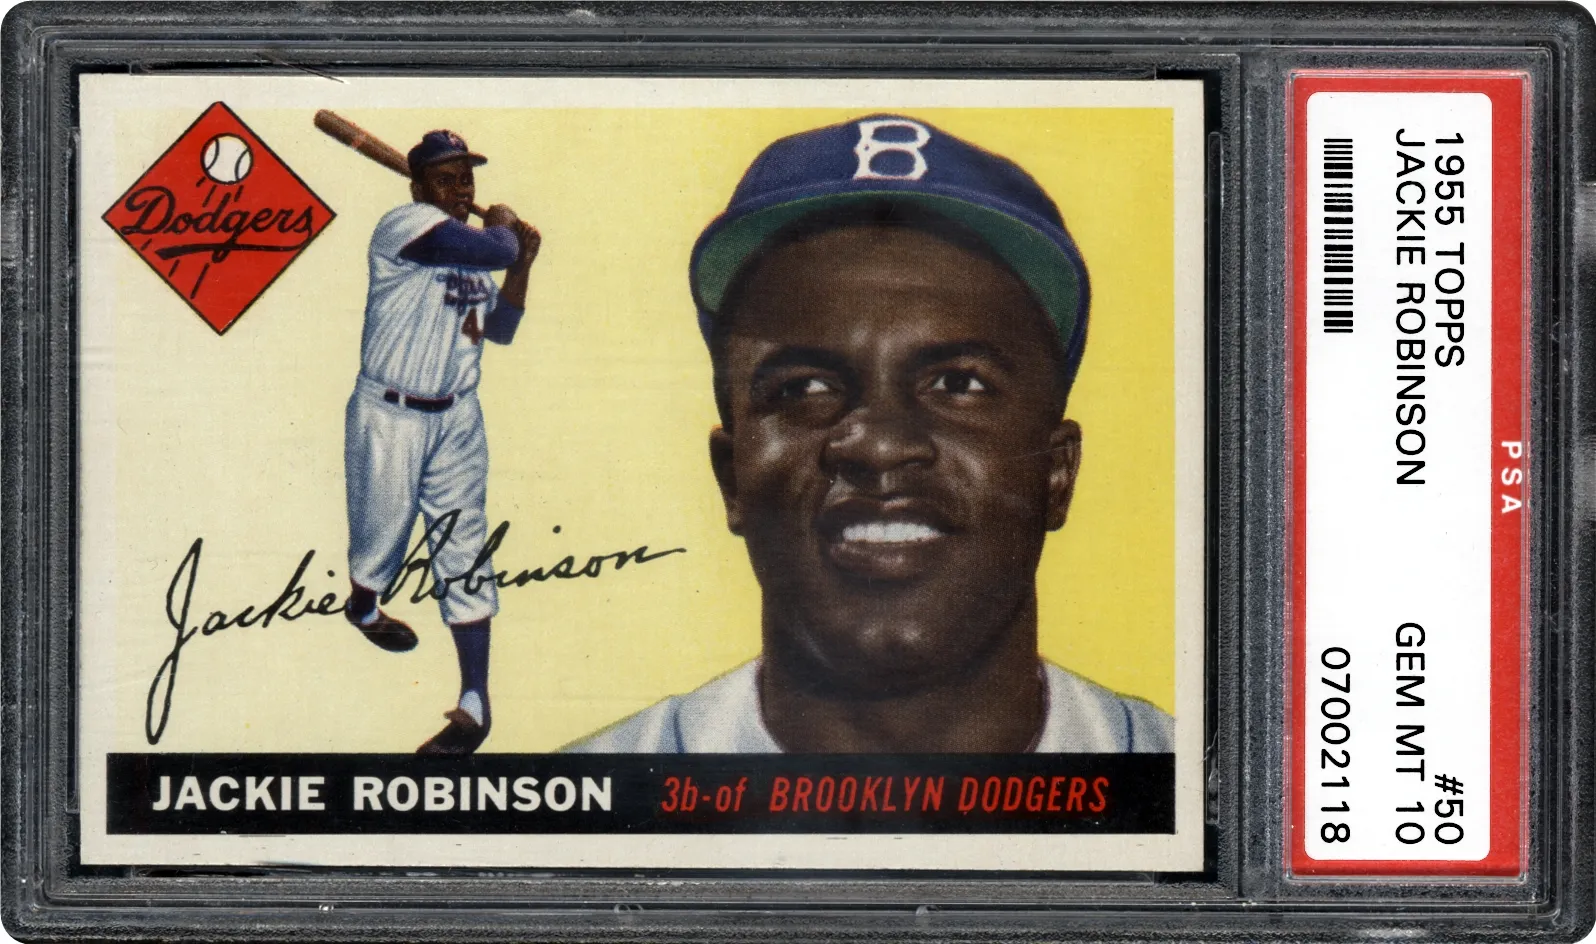 Best Jackie Robinson Baseball Card to Invest in - MoneyMade